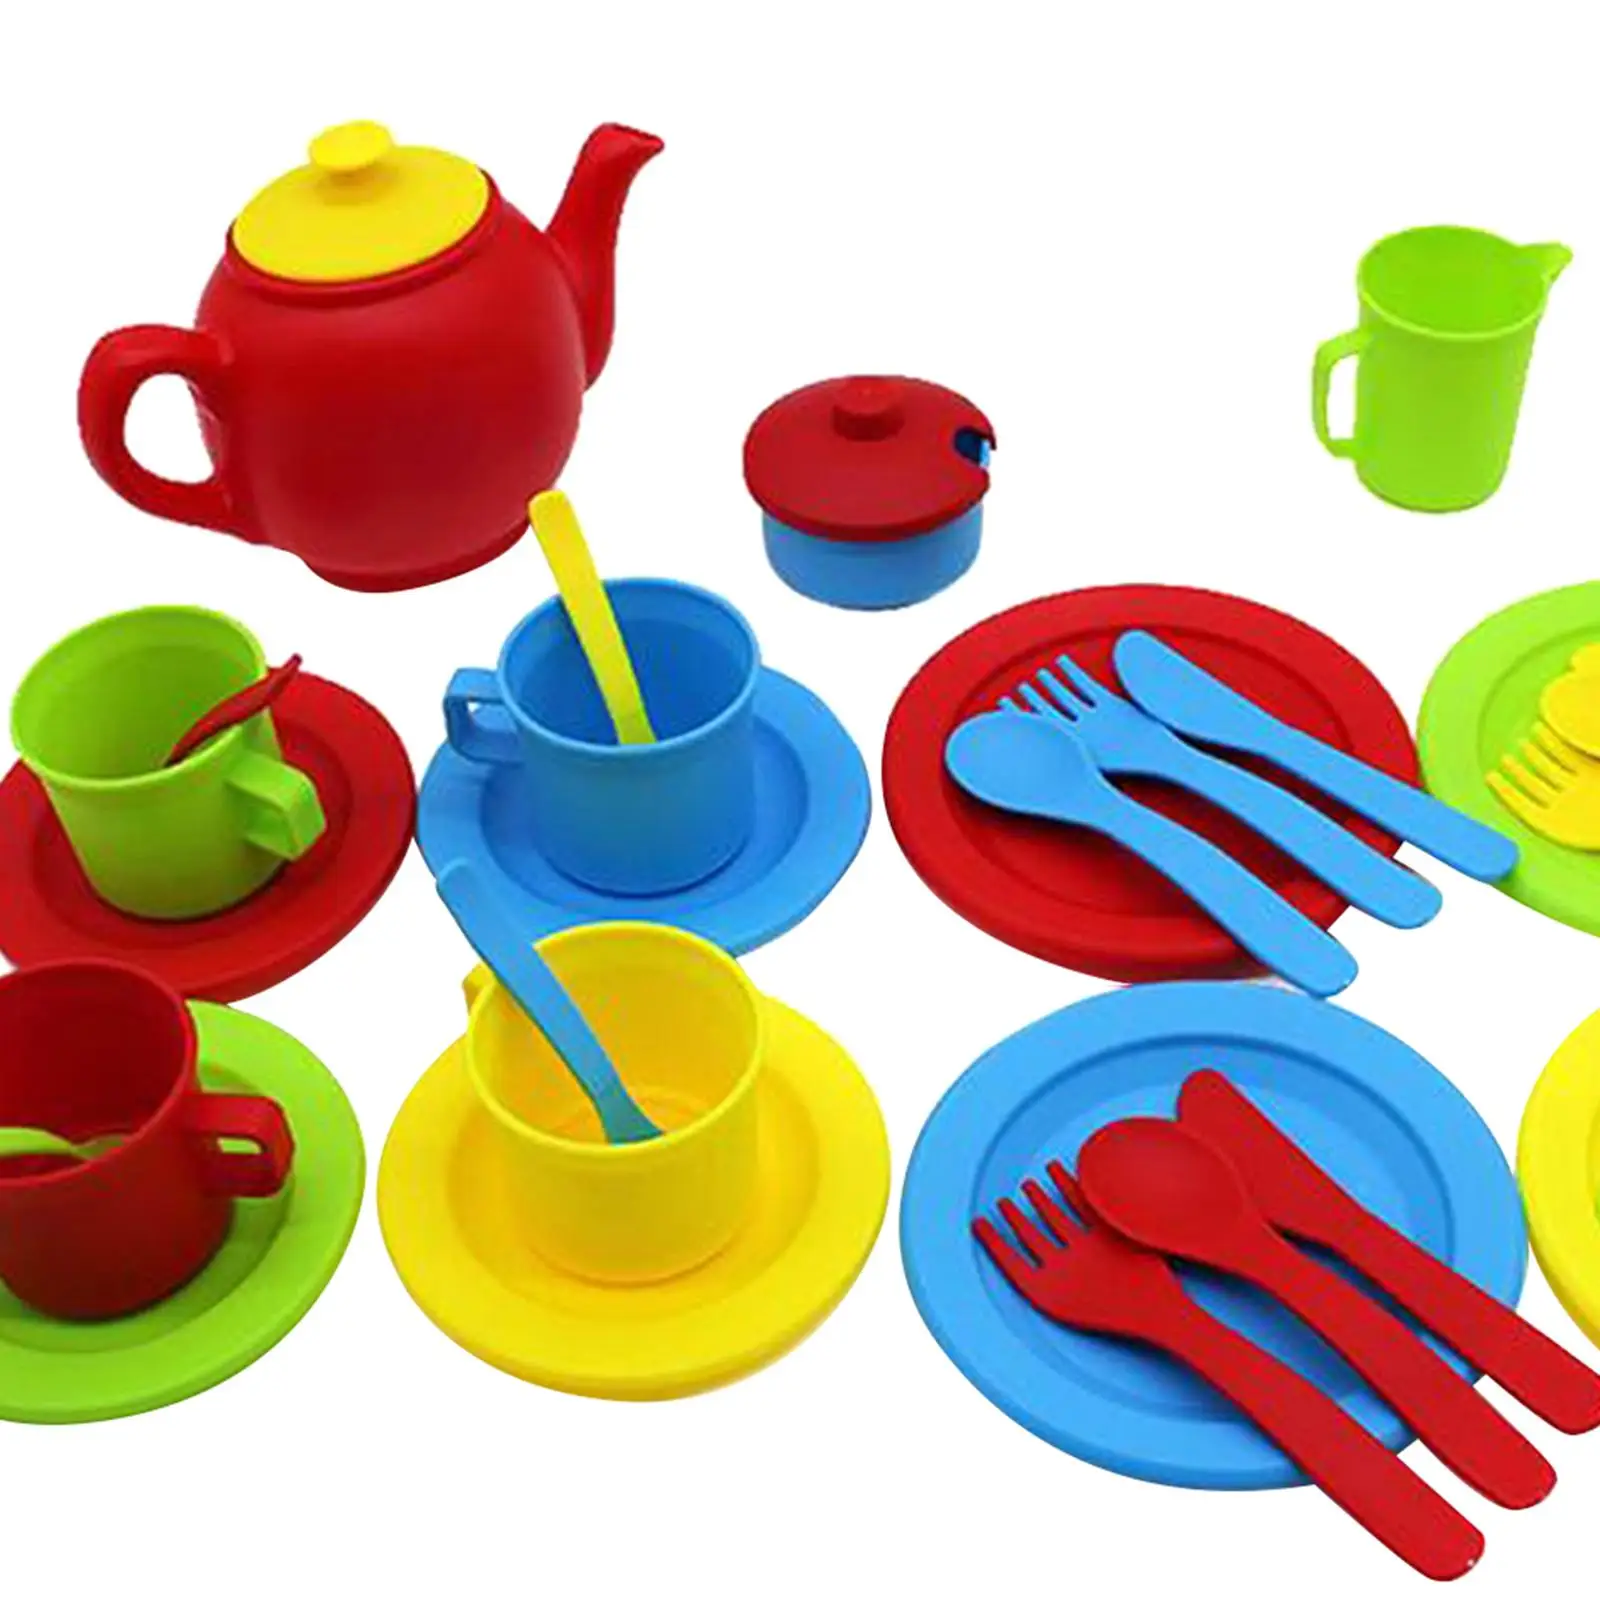 35x Kids Afternoon Tea Set kitchen Playset Simulation Play House Kitchen Children`s Toy Cute for Holiday Gifts Toddler Kids